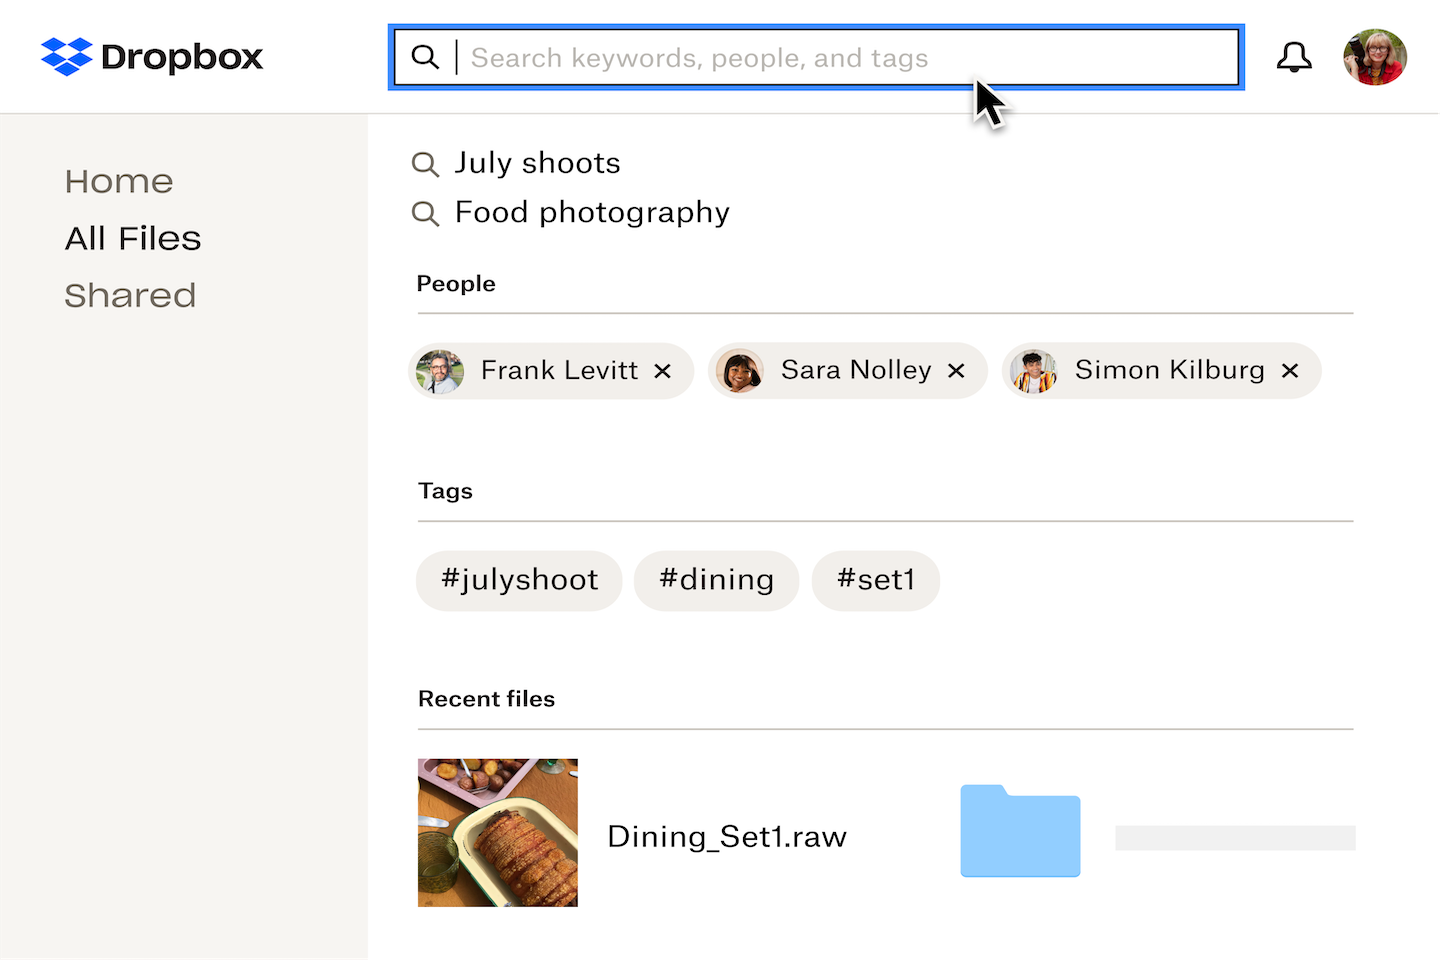 A screenshot shows a search bar and suggestions for people, tags, and recent files 